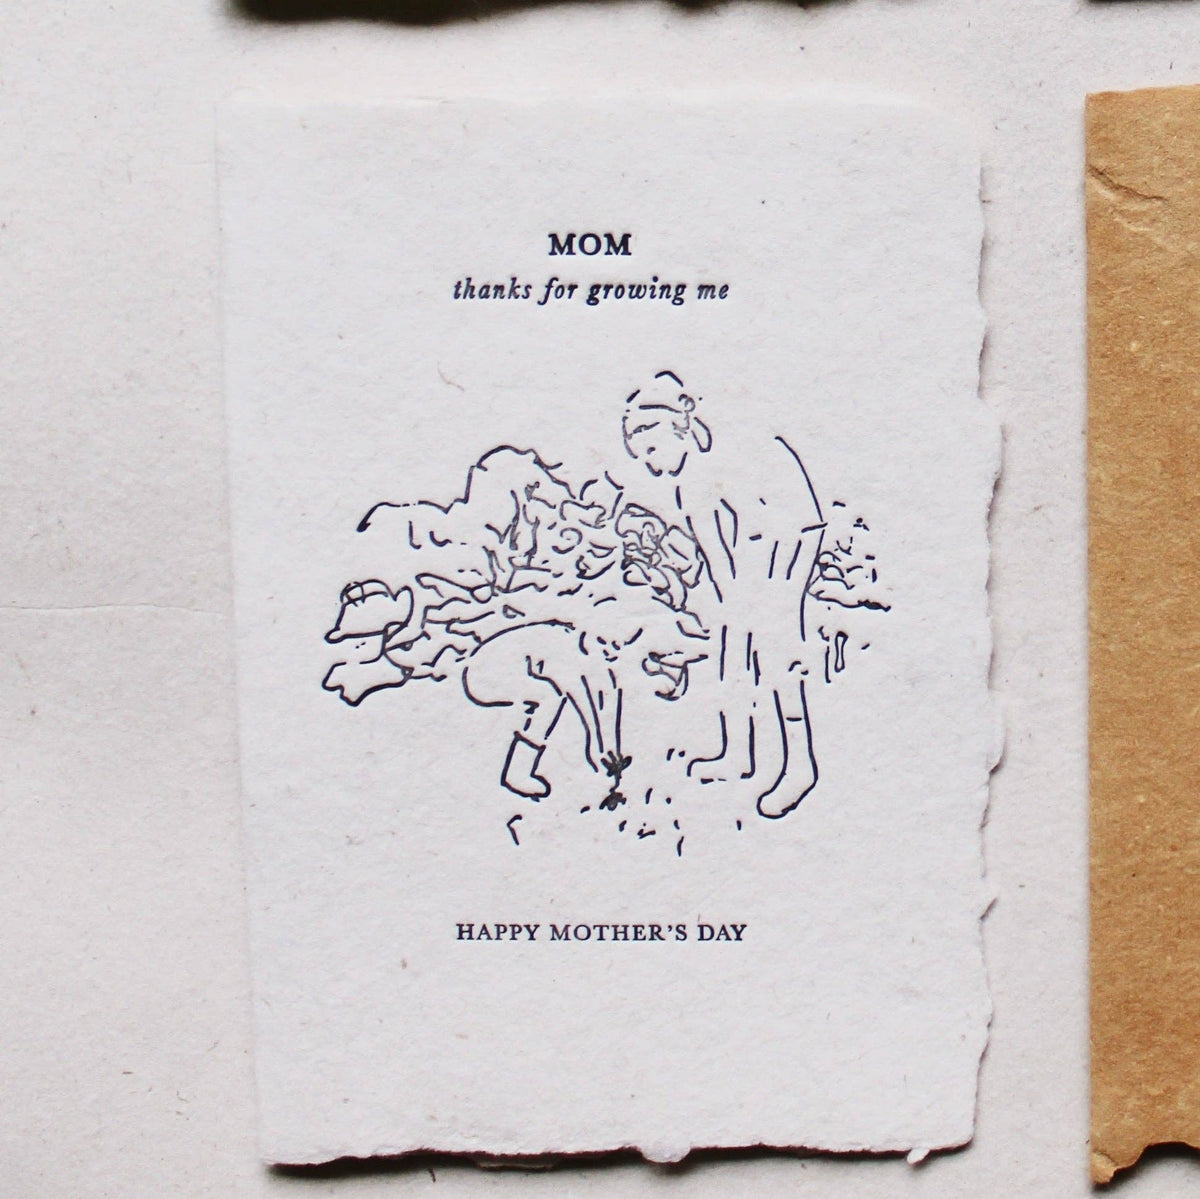 Mother’s Day Cards - III: Mom you mean so much to me